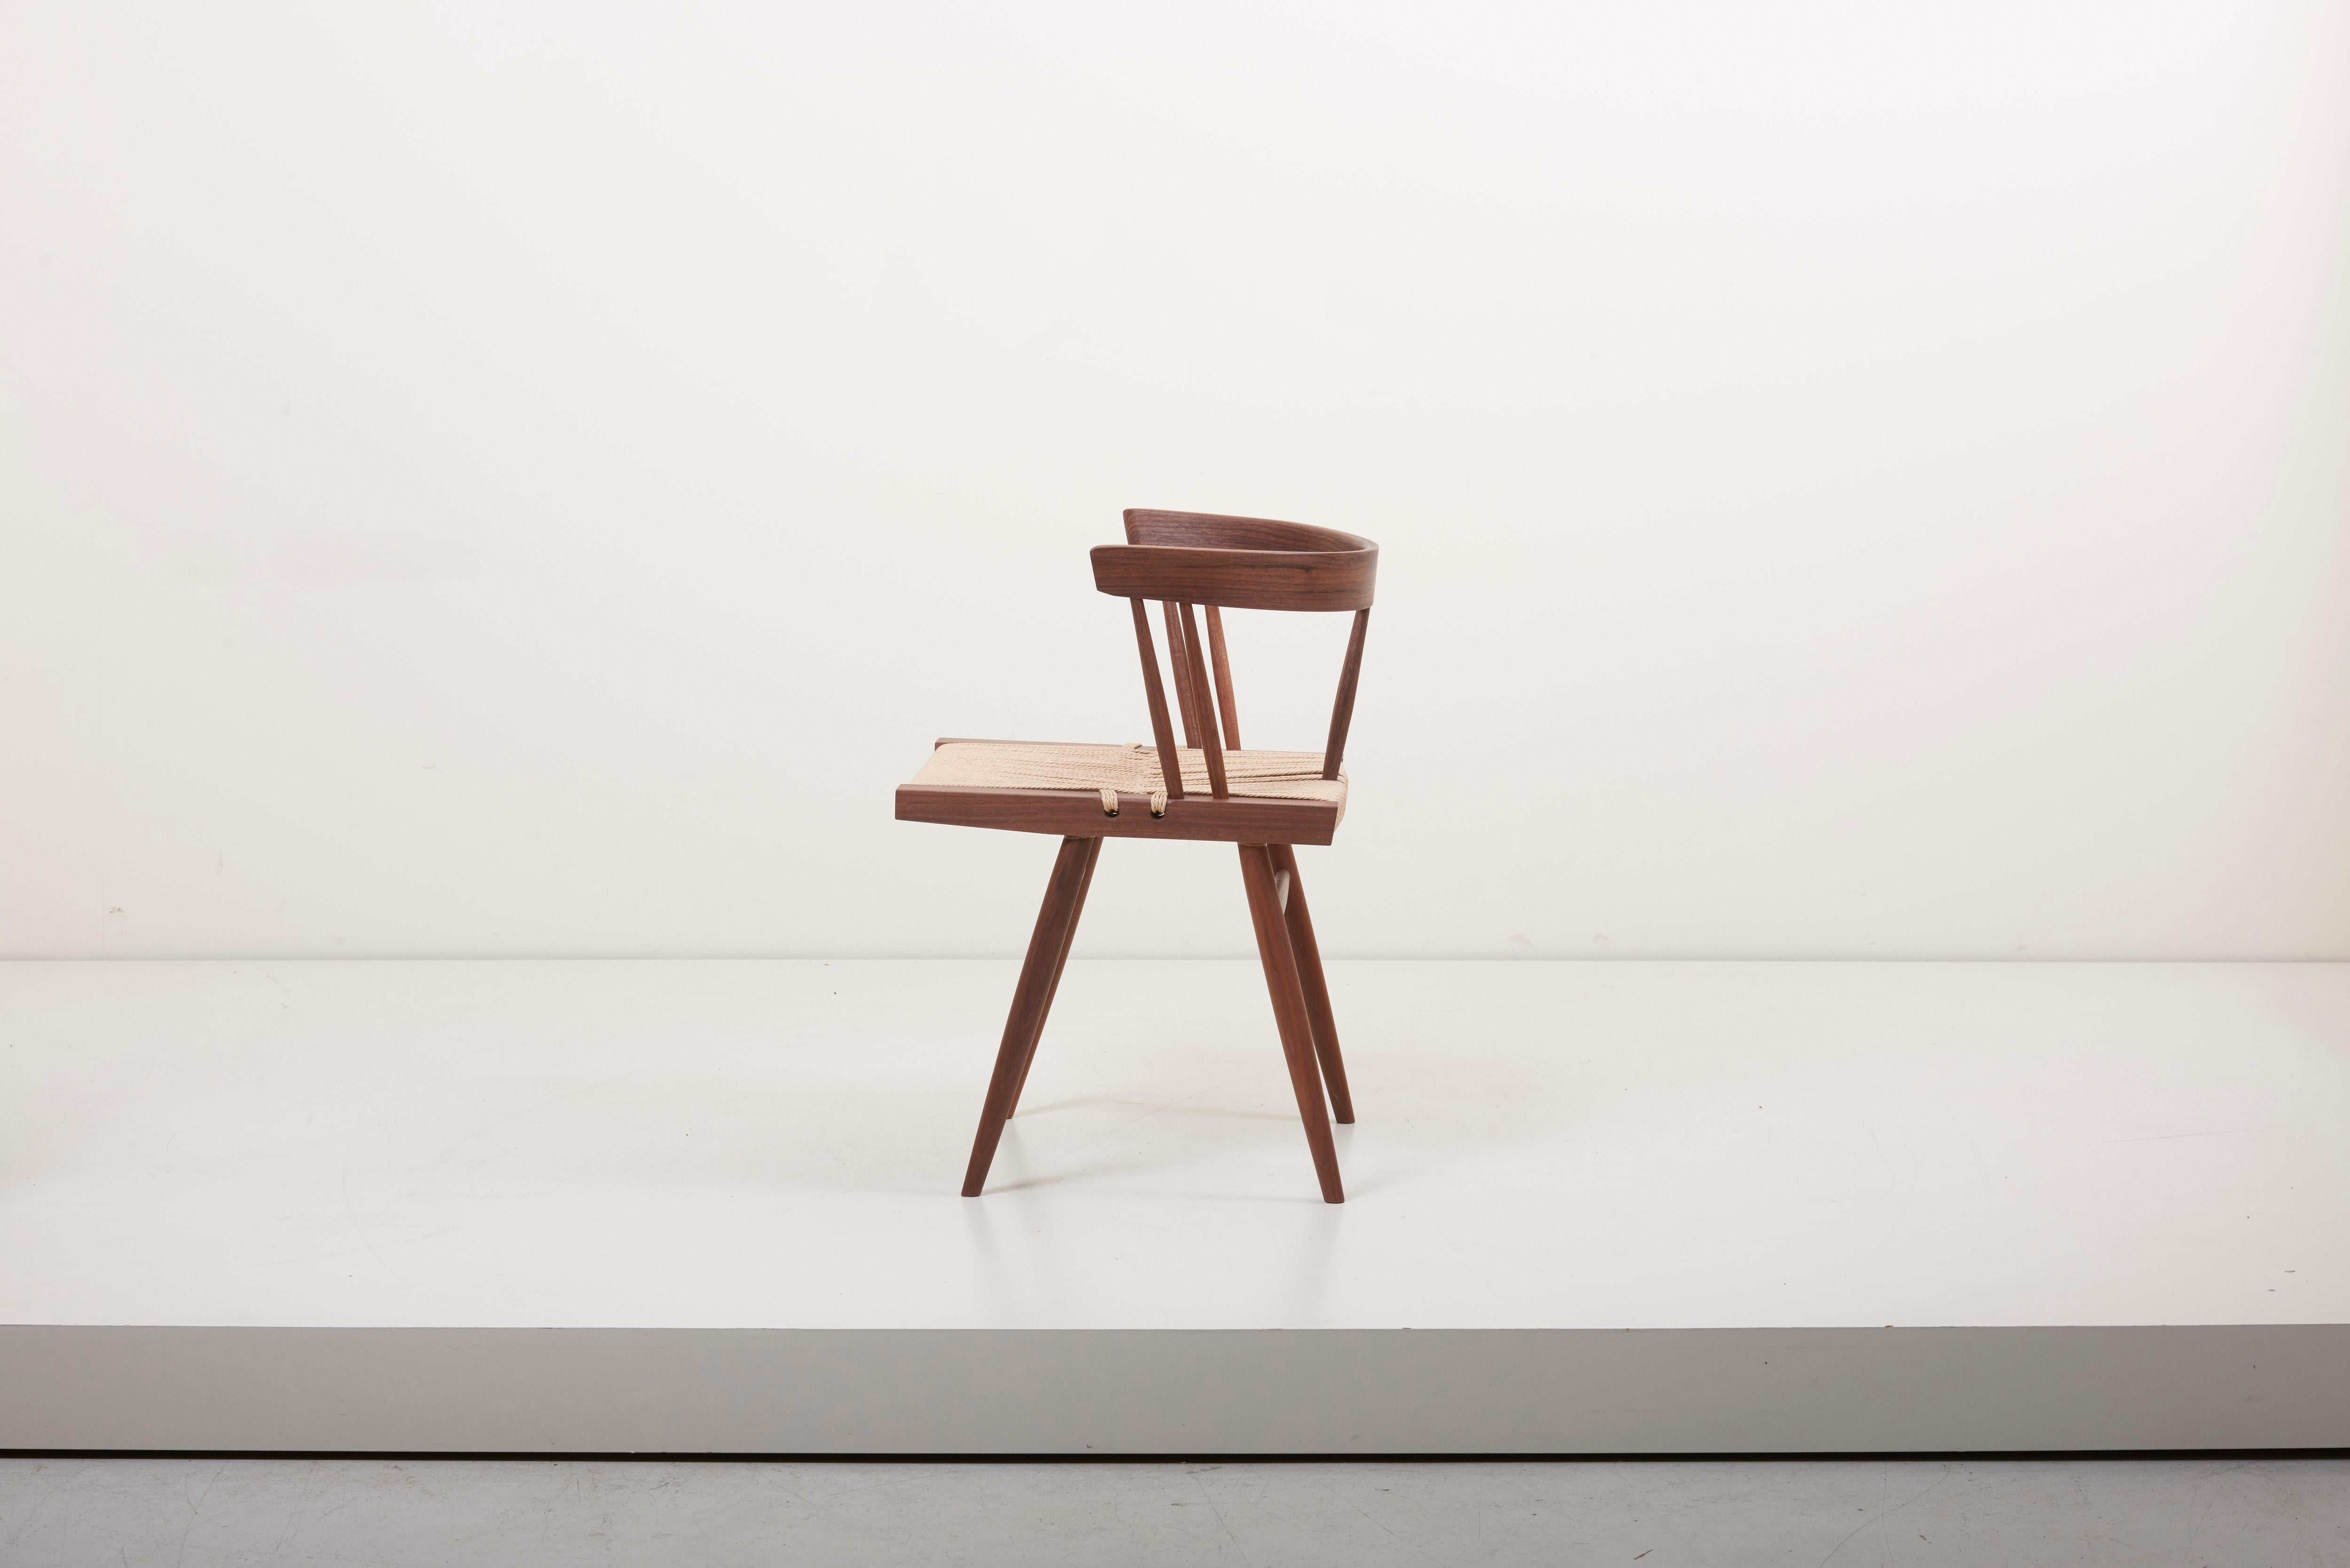 Seagrass Set of Six Grass Seated Dining Chairs by George Nakashima Studio, US - 2019